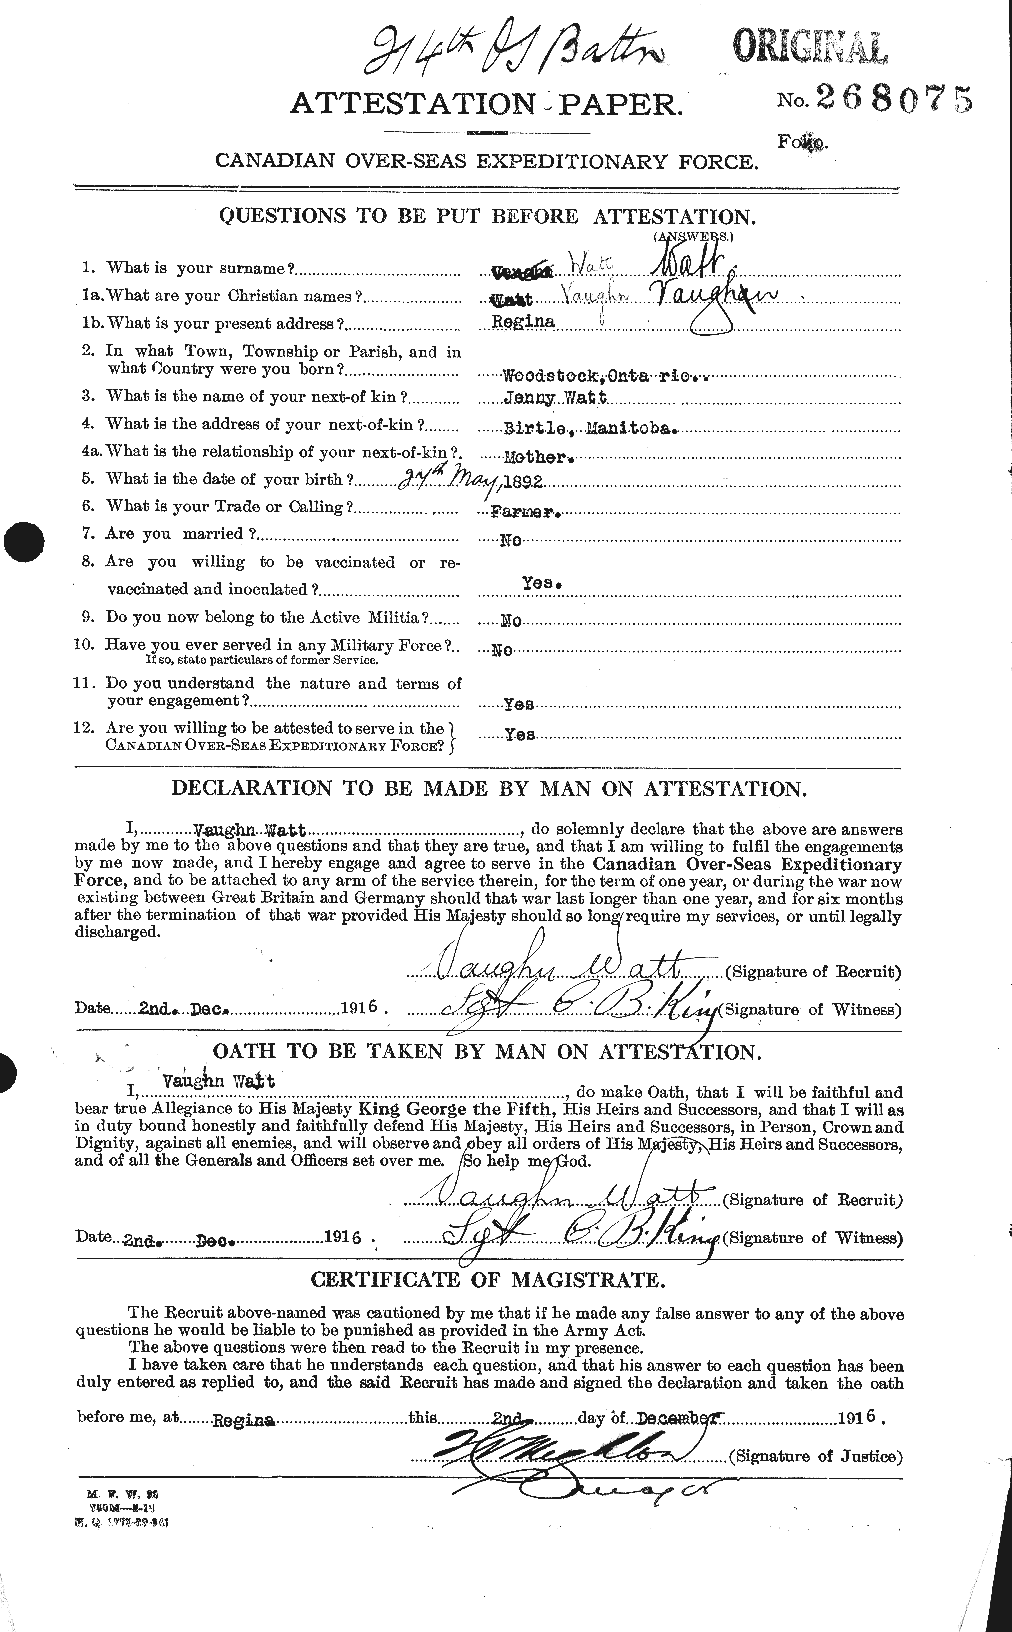 Personnel Records of the First World War - CEF 660552a